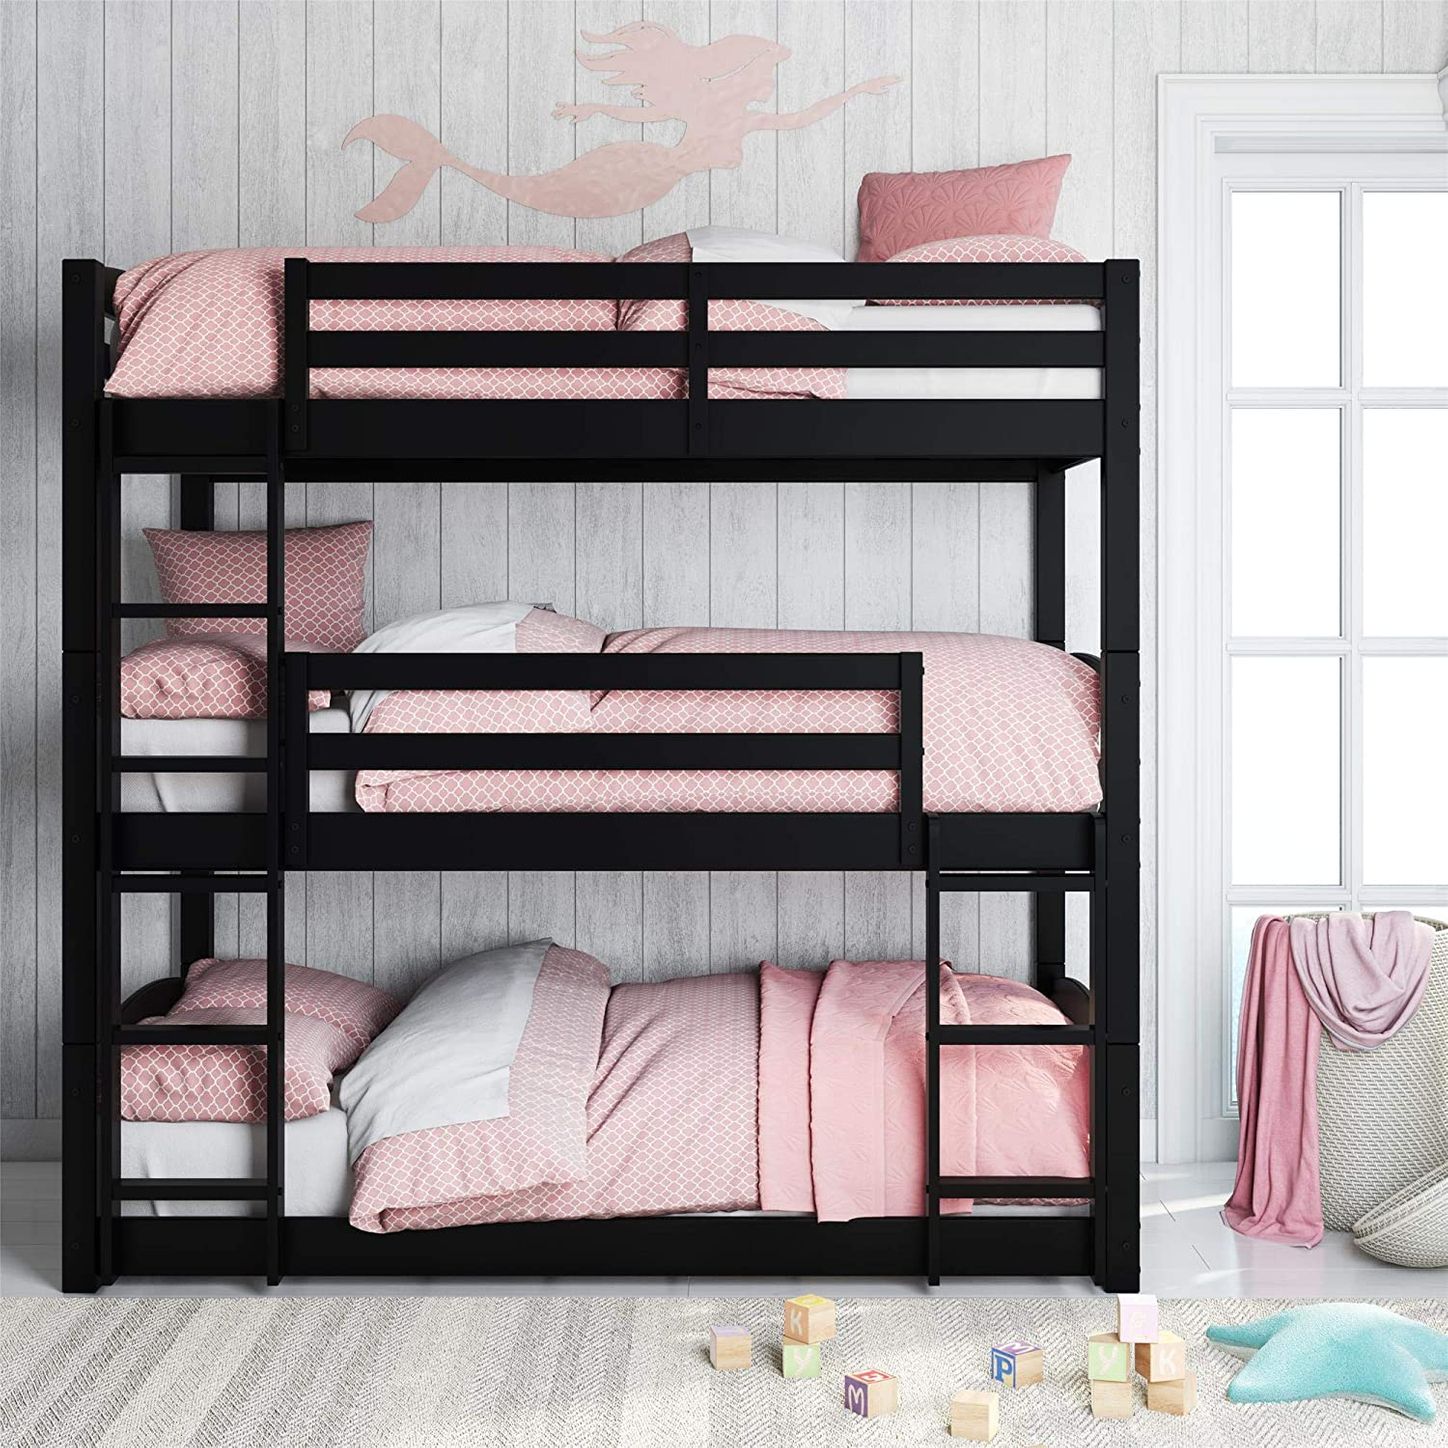 8 Best Bunk Beds 2020 The Strategist, Bunk Bed With No Bottom